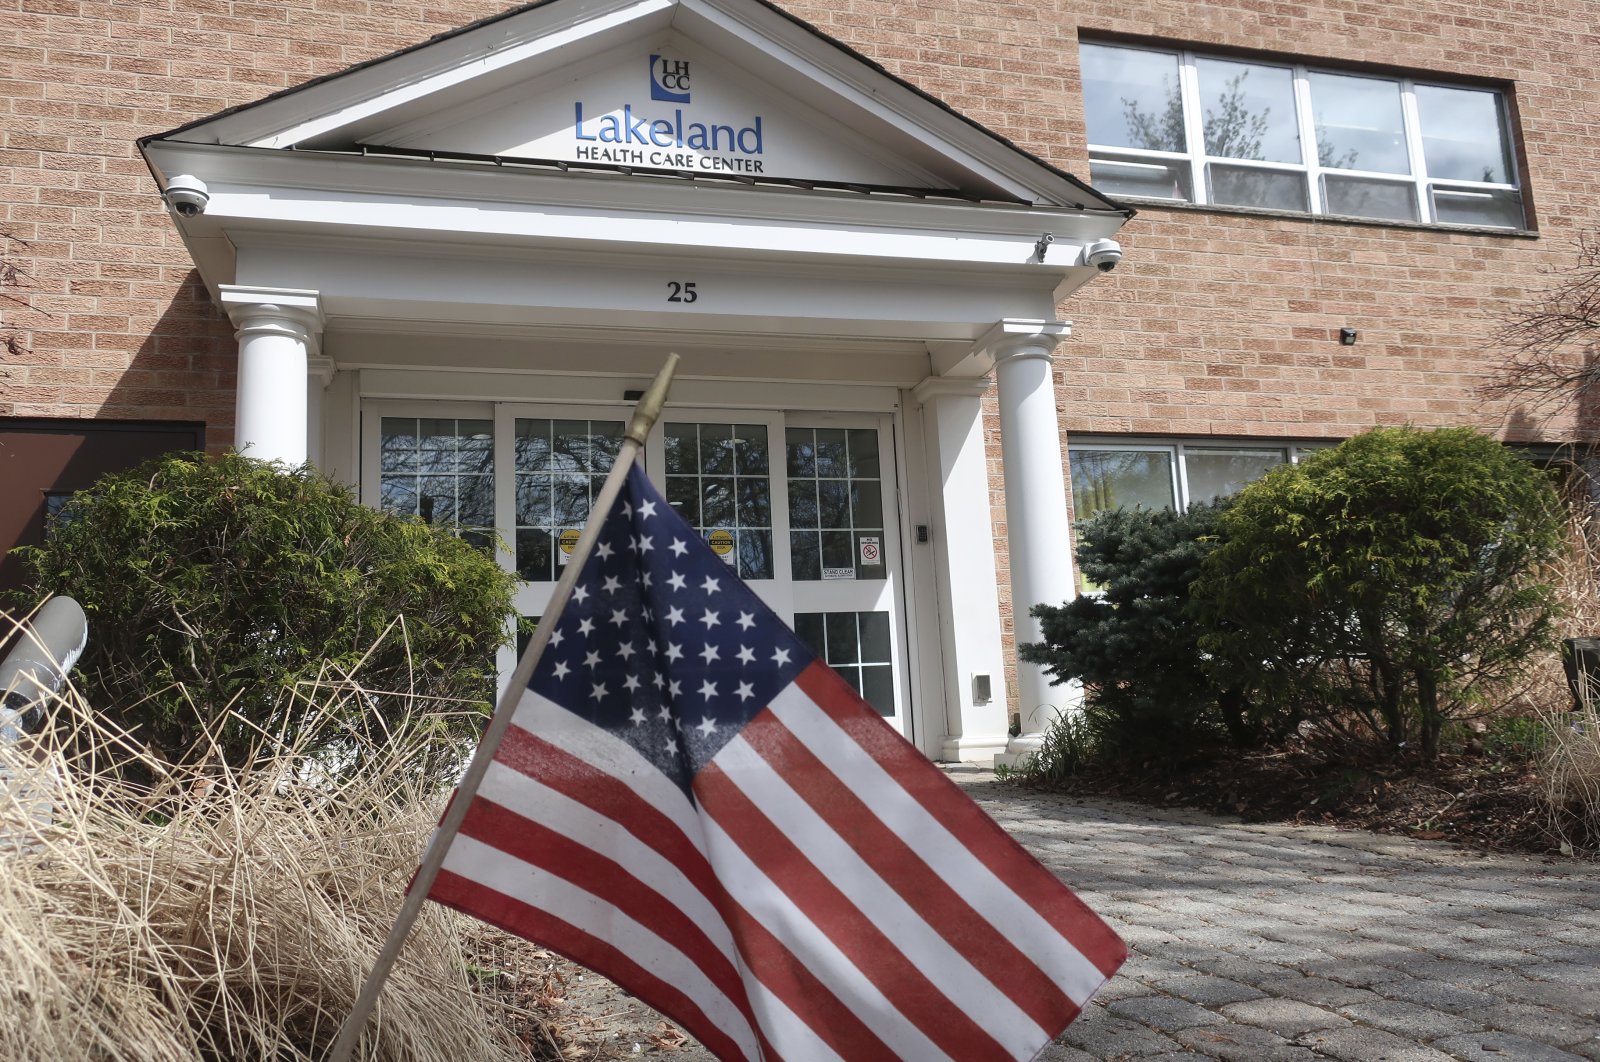 This Wednesday, April 1, 2020, file photo, shows an entrance to the Lakeland Health Care Center, a nursing home in Wanaque, N.J. Multiple people at the facility have died of COVID-19, the disease caused by the new coronavirus, according to the borough's Mayor Dan Mahler. (AP Photo)